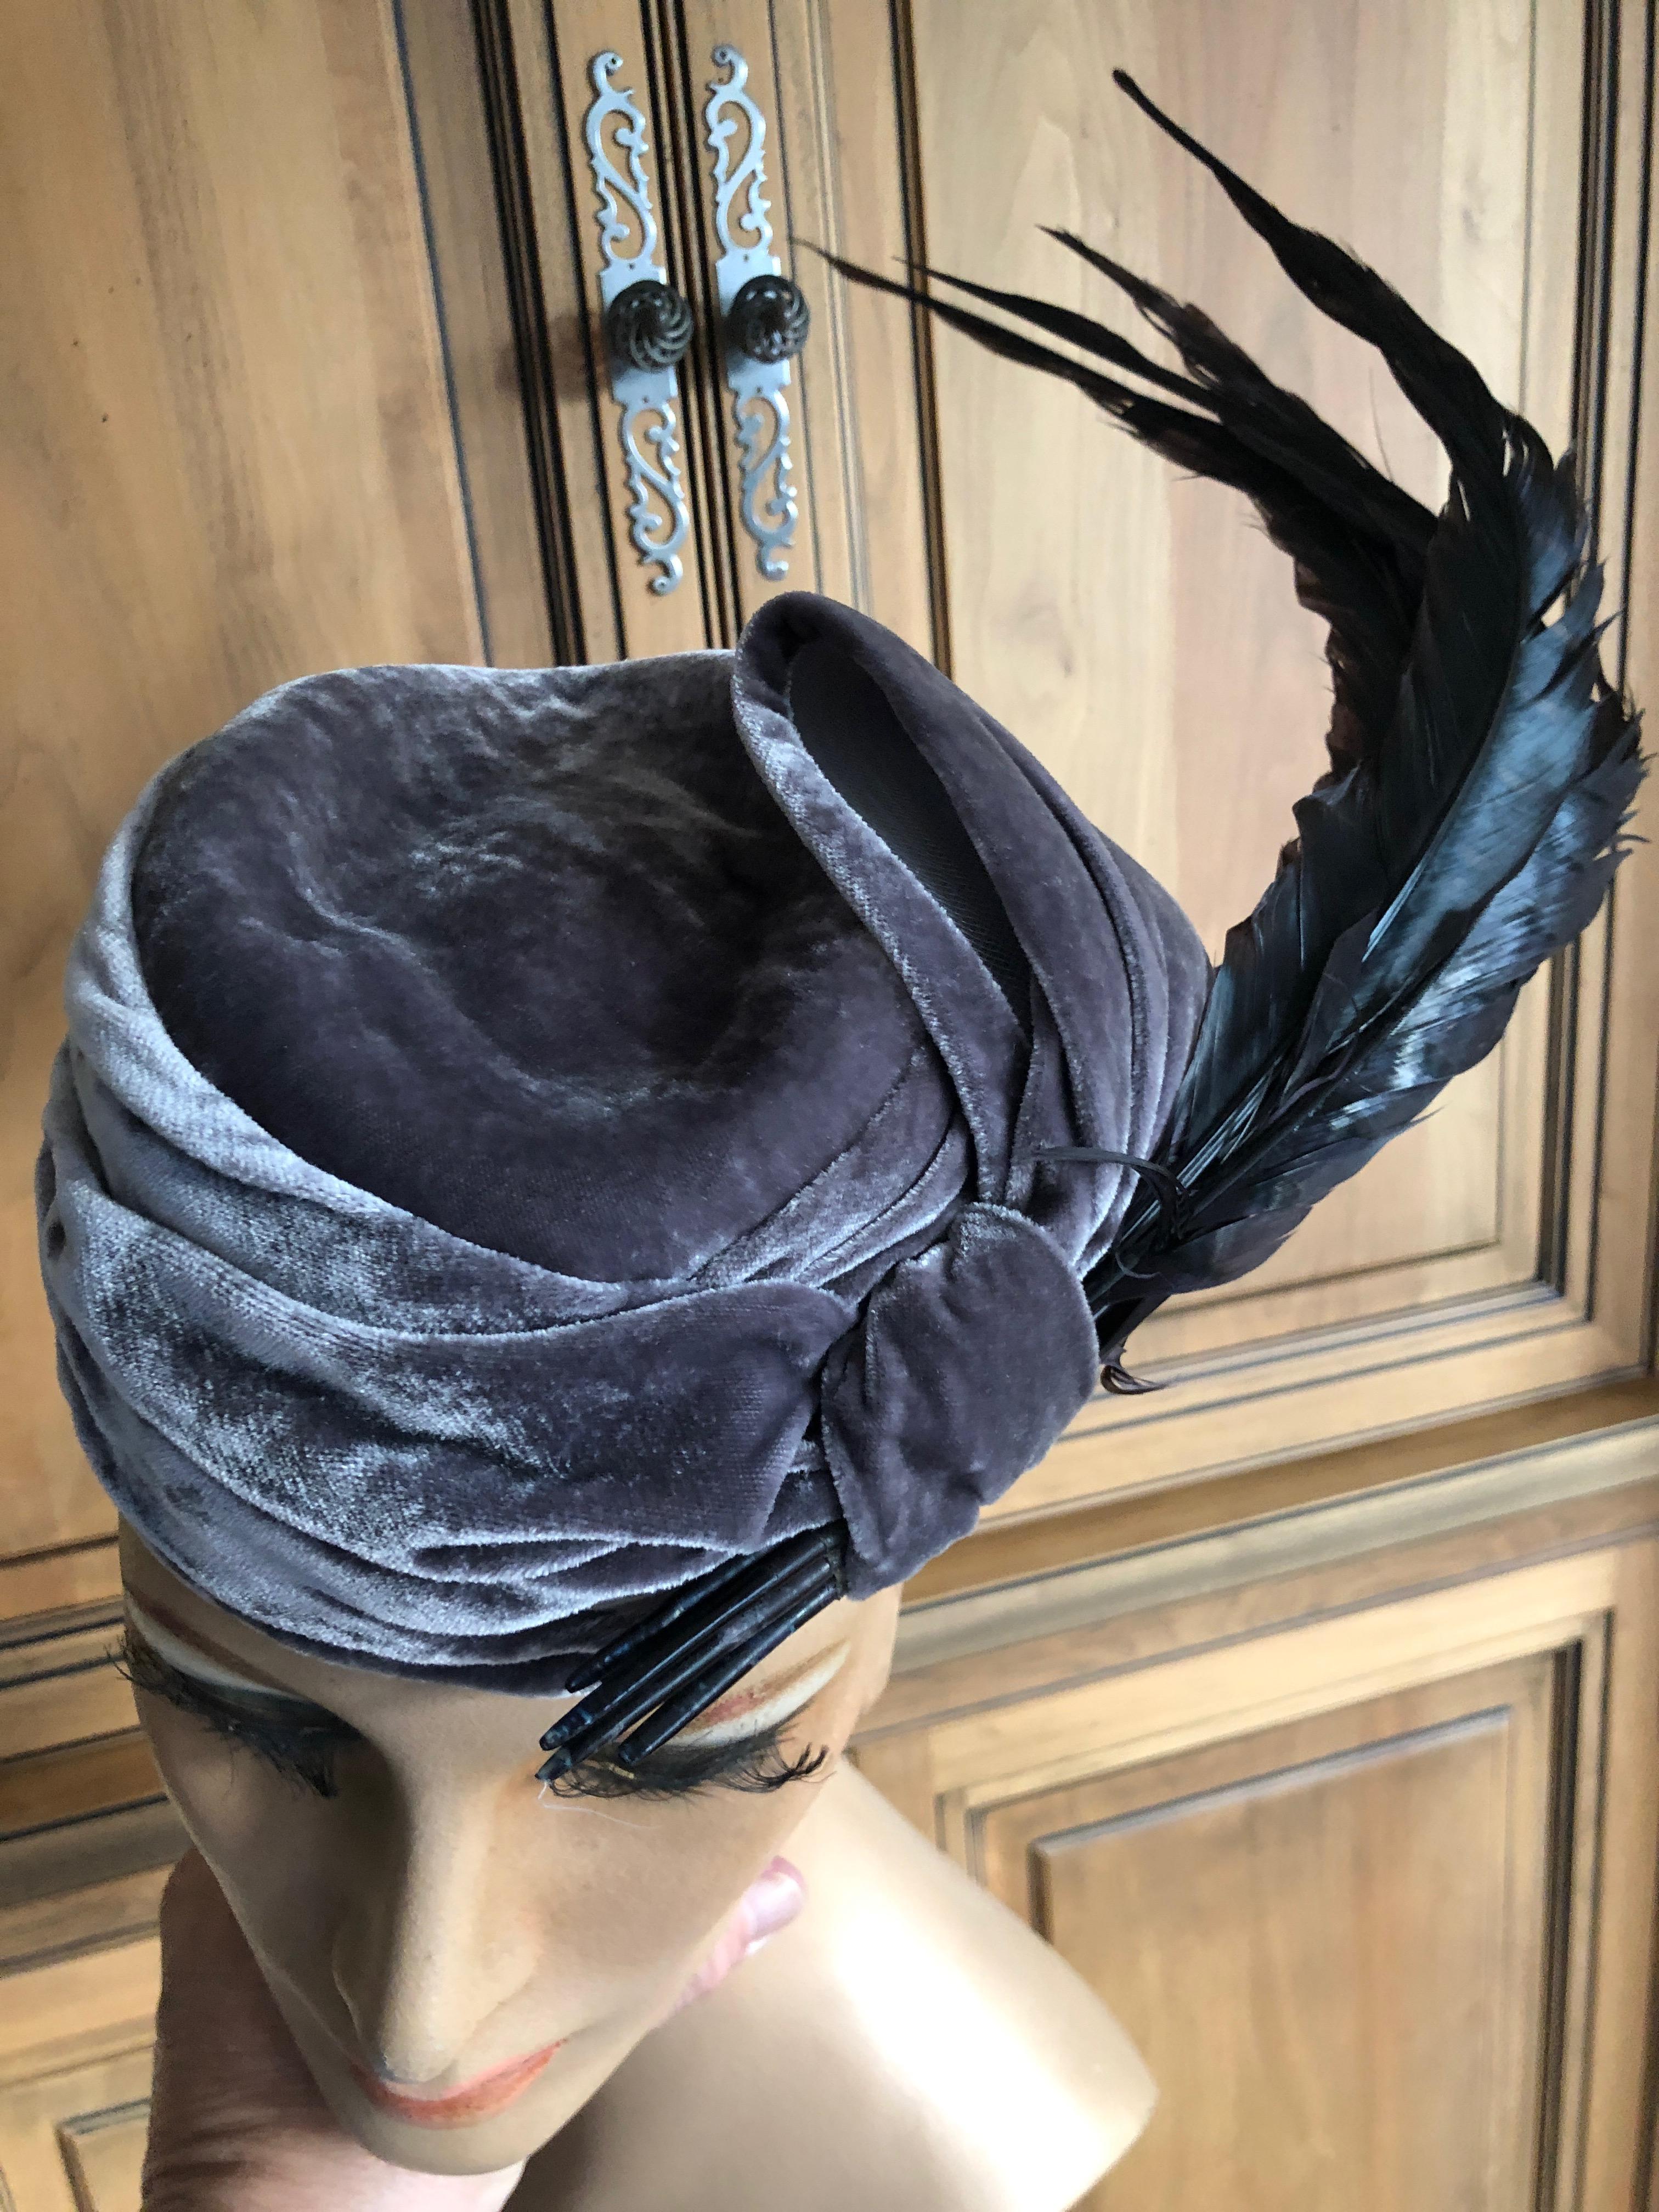 Christian Dior Haute Couture Feathered Hat by Stephen Jones for John Galliano In Excellent Condition For Sale In Cloverdale, CA